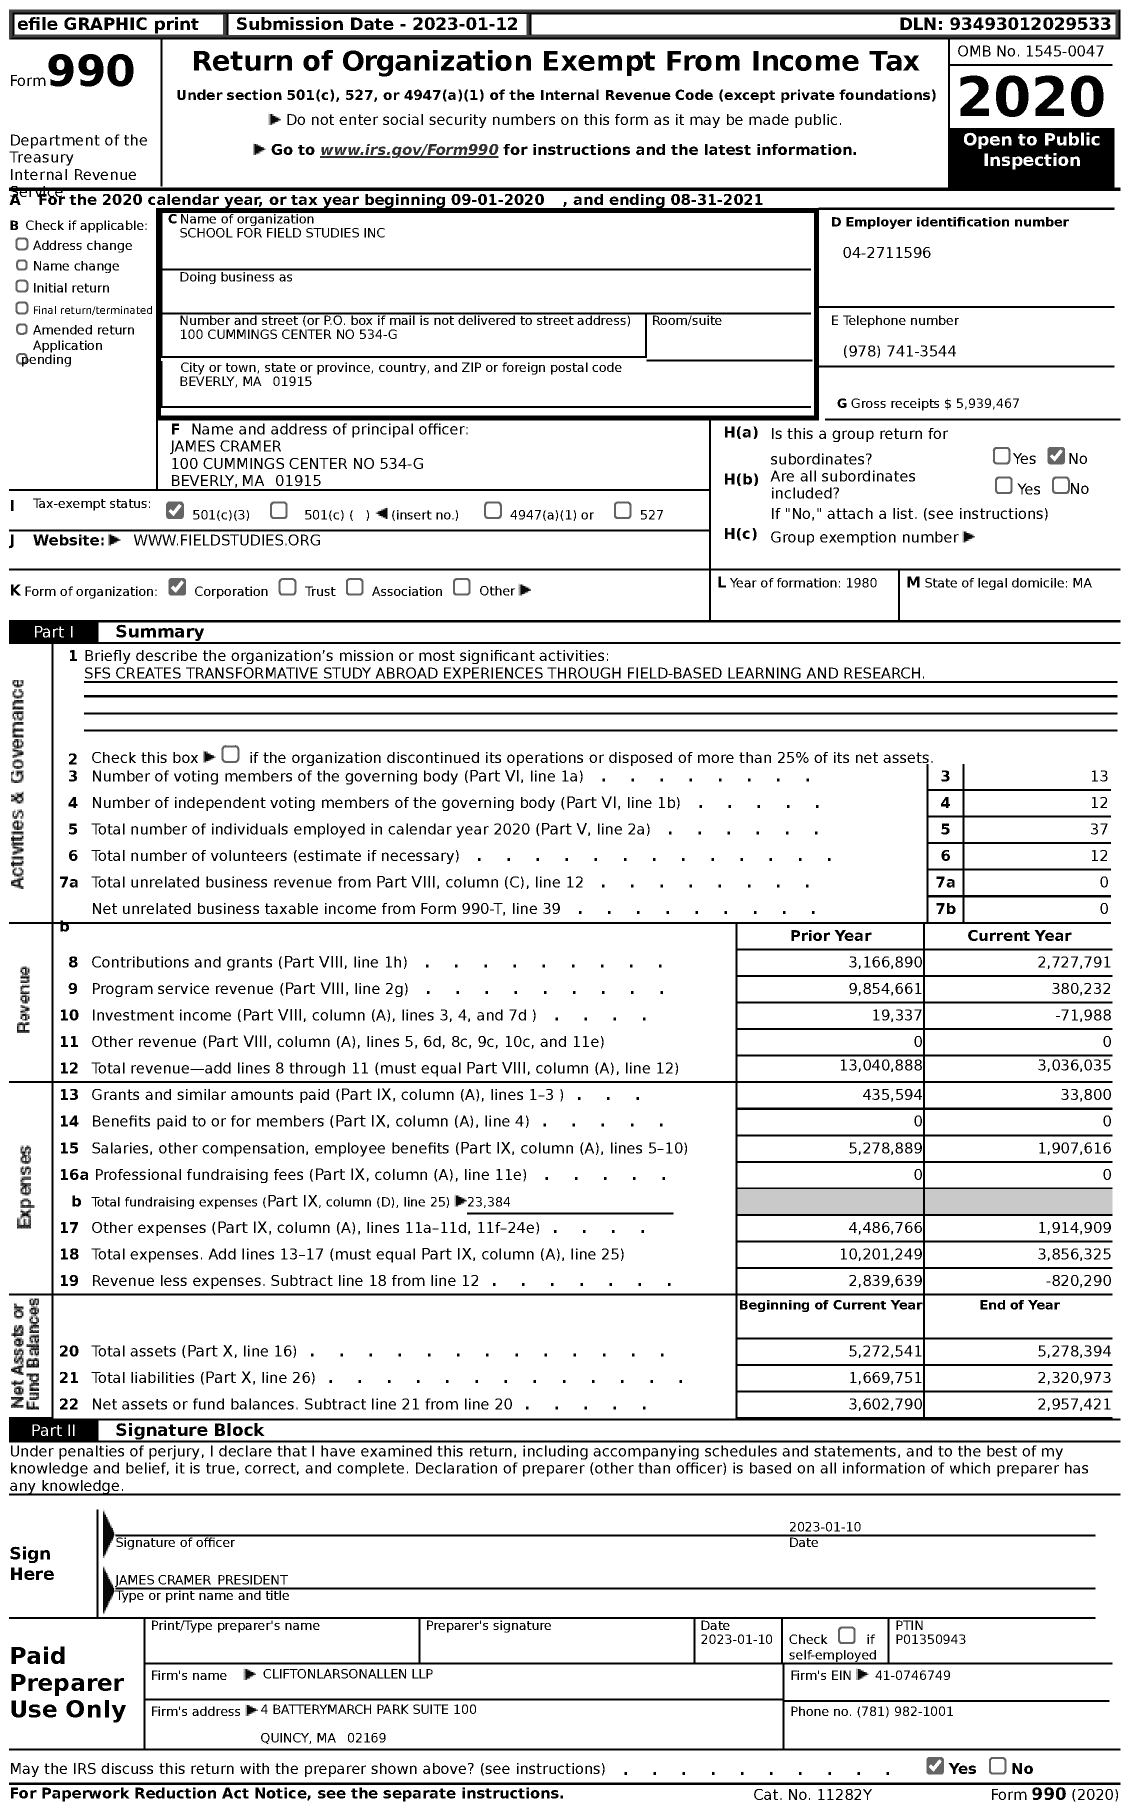 Image of first page of 2020 Form 990 for School for Field Studies (SFS)